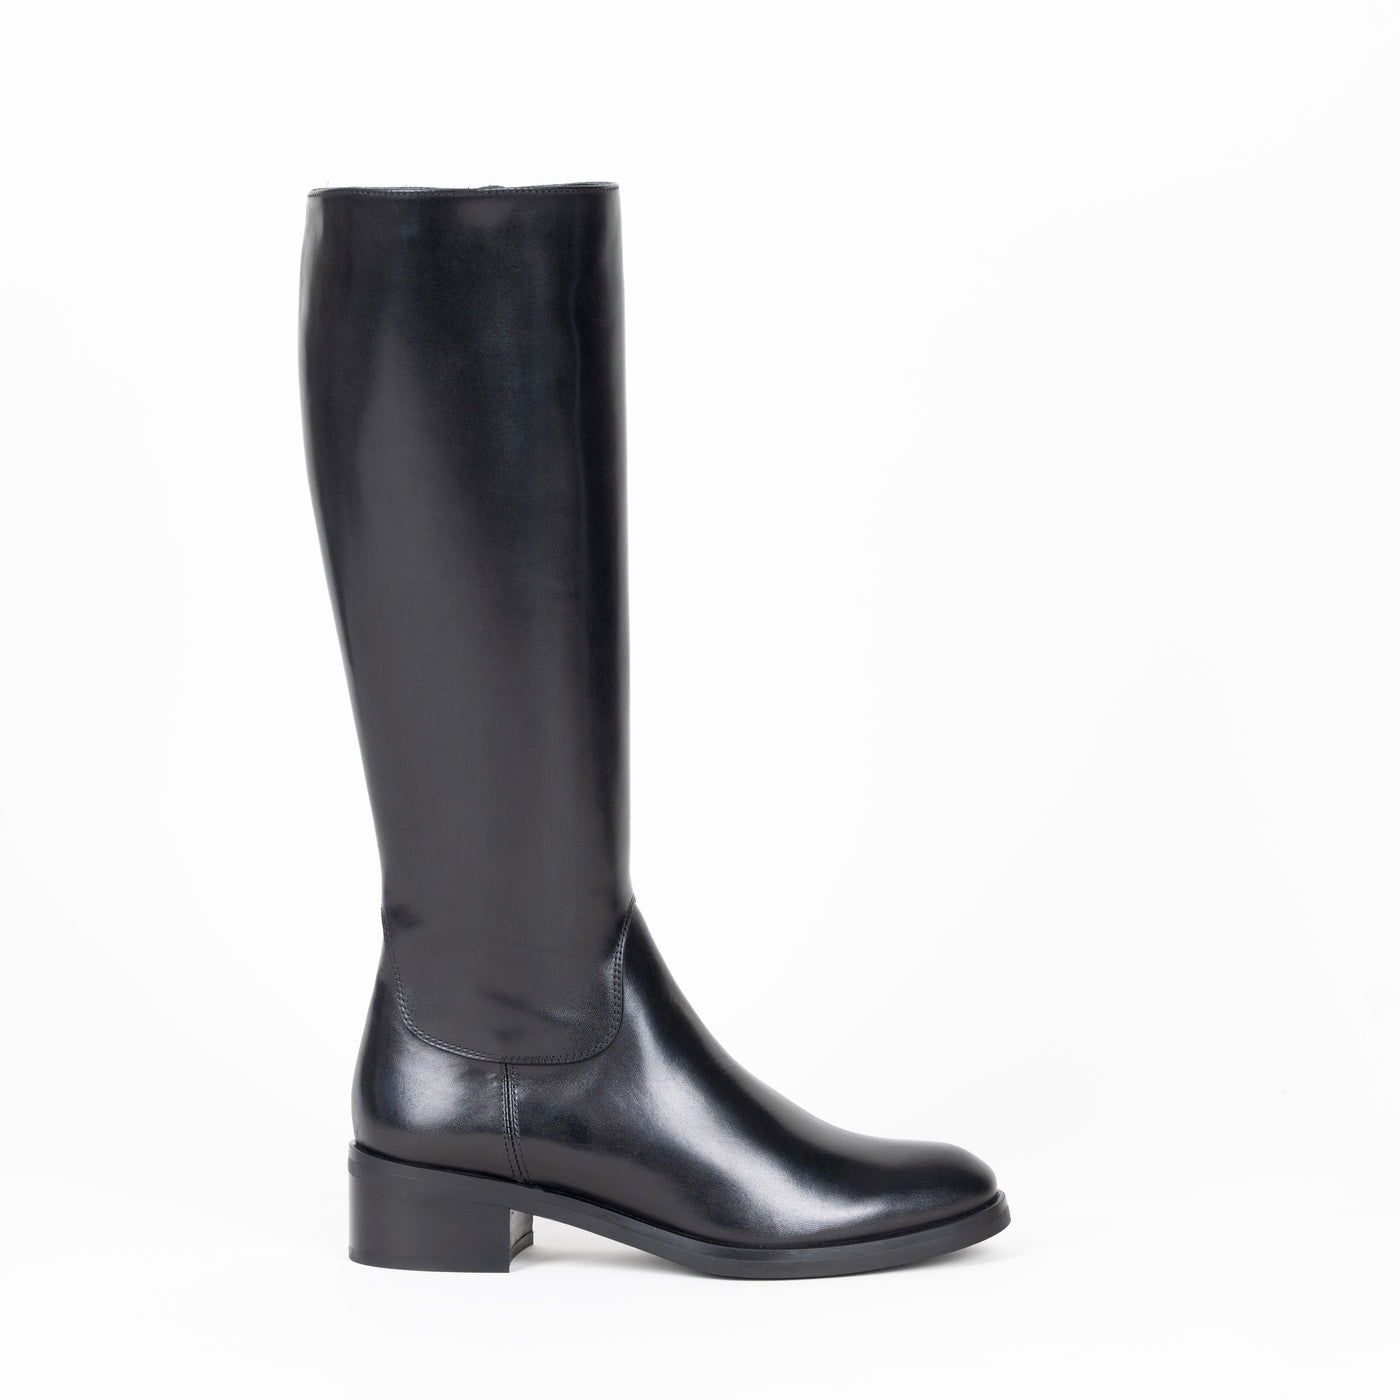 Black leather riding boot